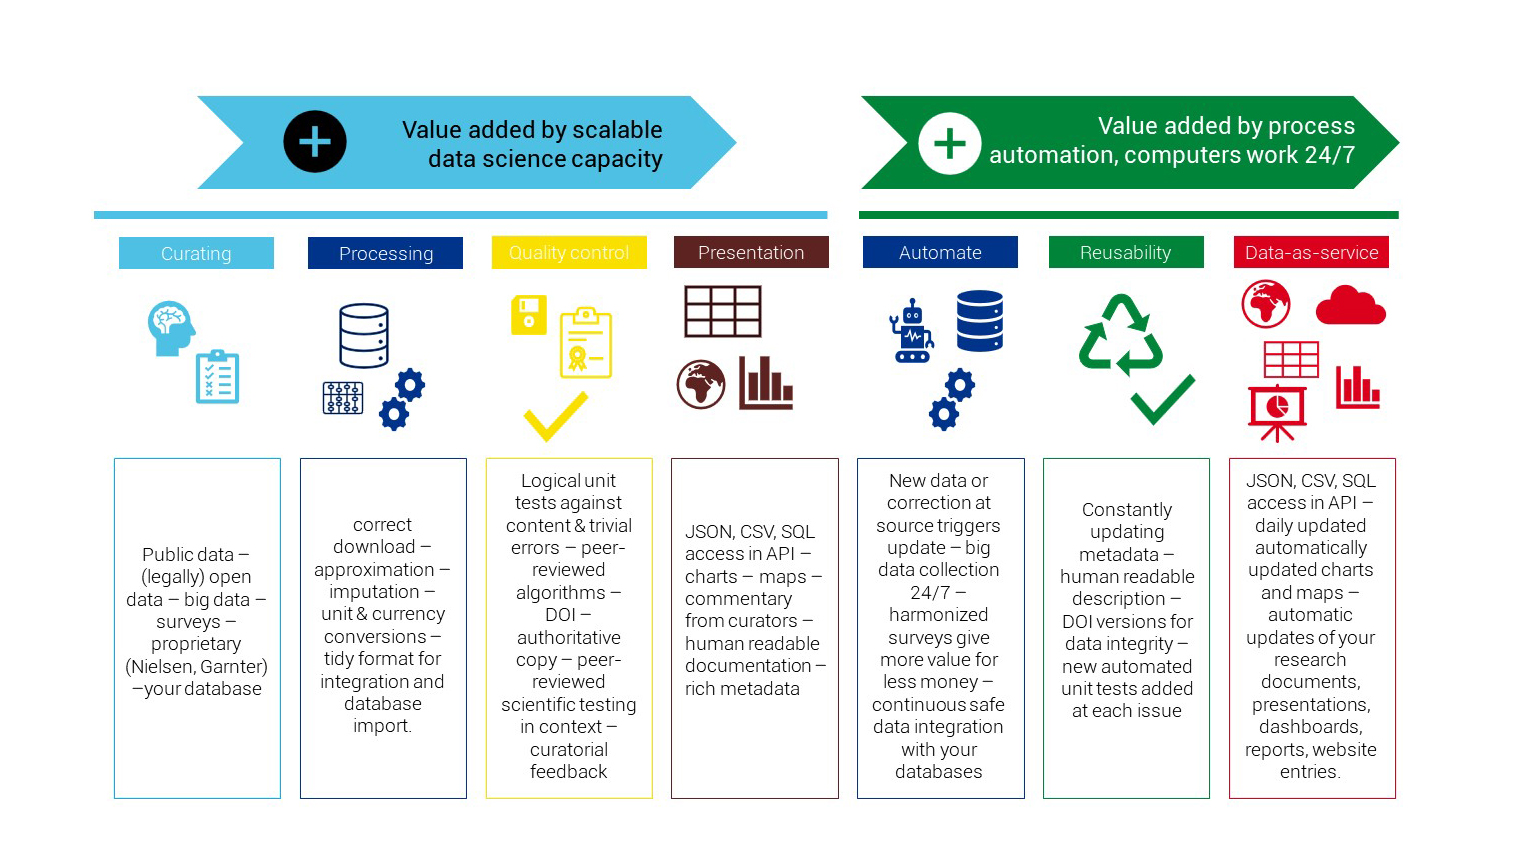 We are taking a new and modern approach to the ‘data observatory’ concept, and modernizing it with the application of 21st century data and metadata standards, the new results of reproducible research and data science